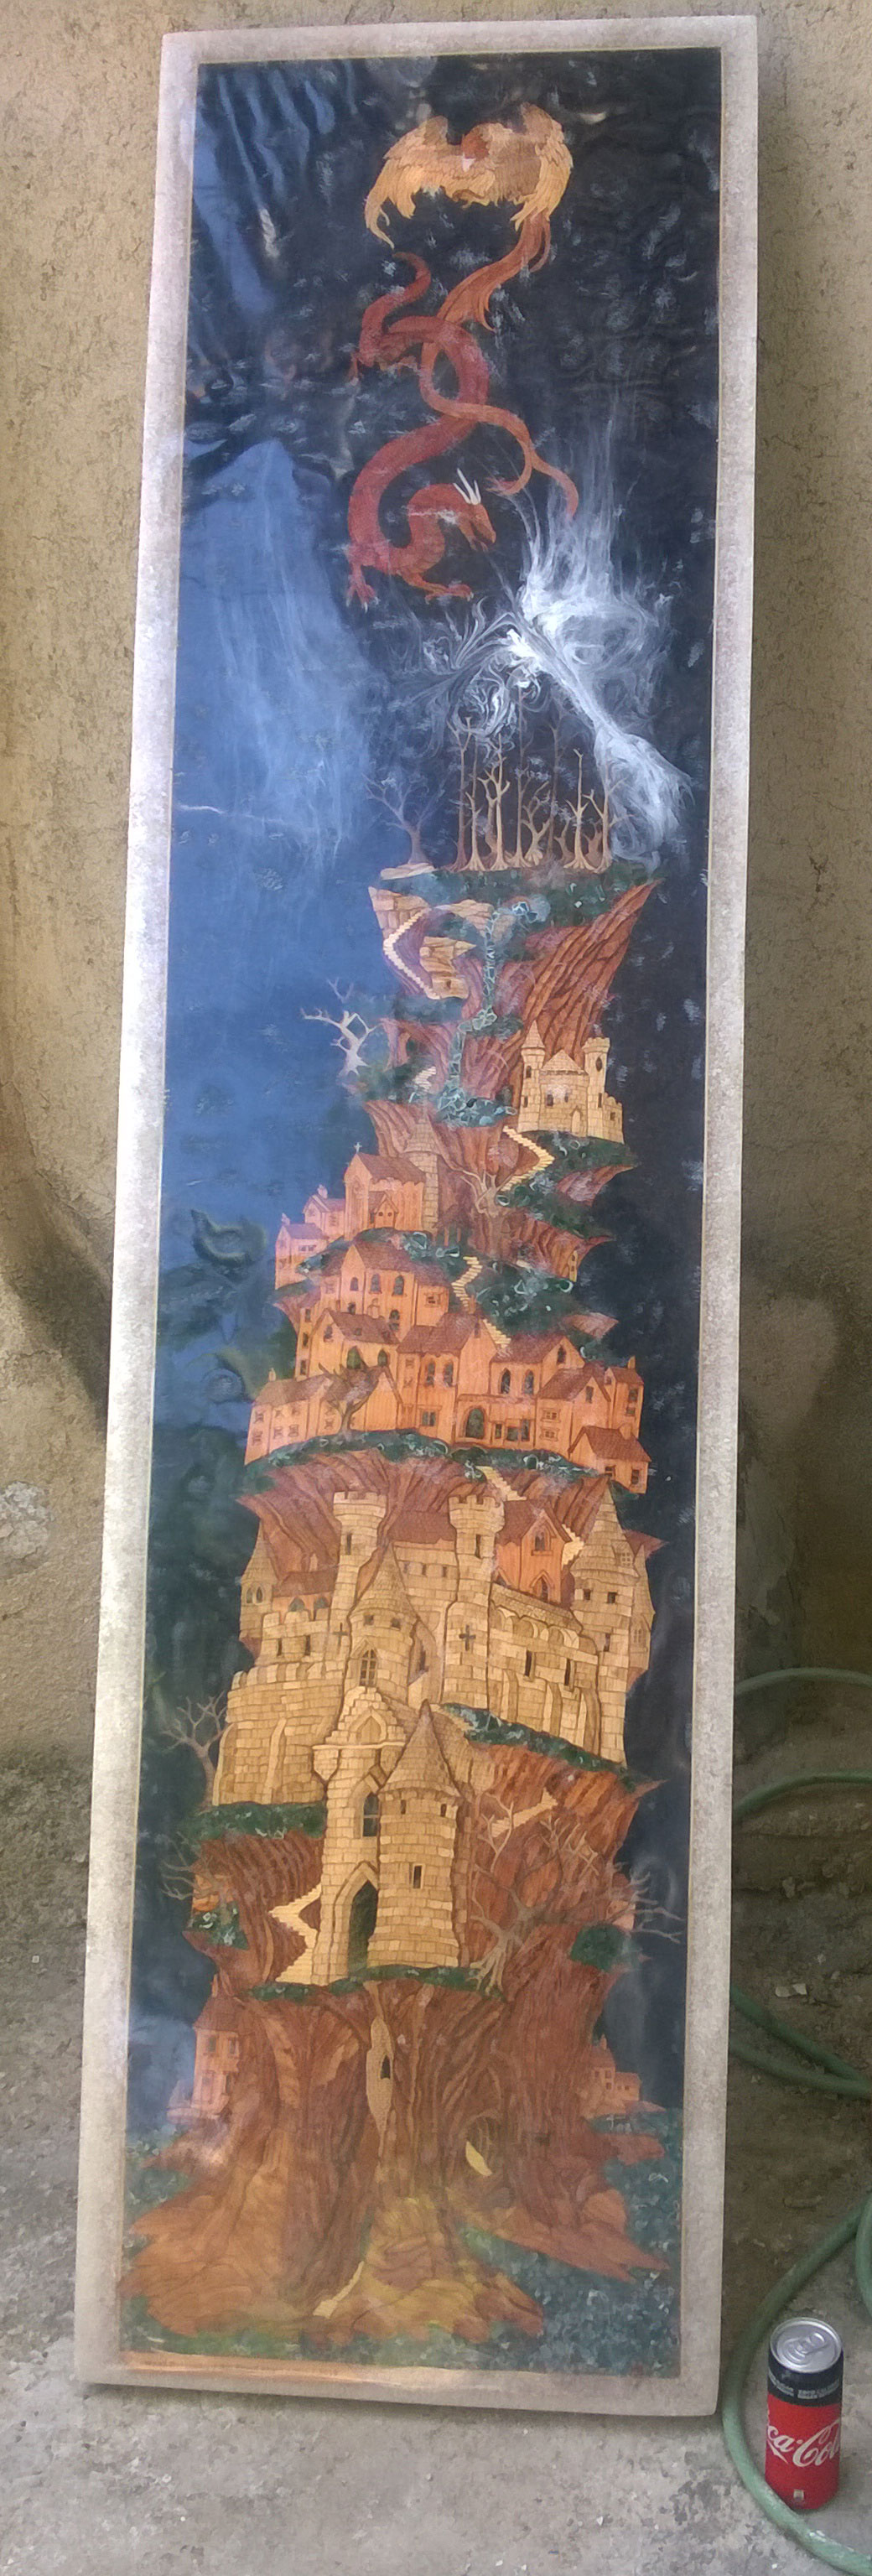 Wood Inlay / Wood Marquetry Panel of
Mountain Village and Dragon